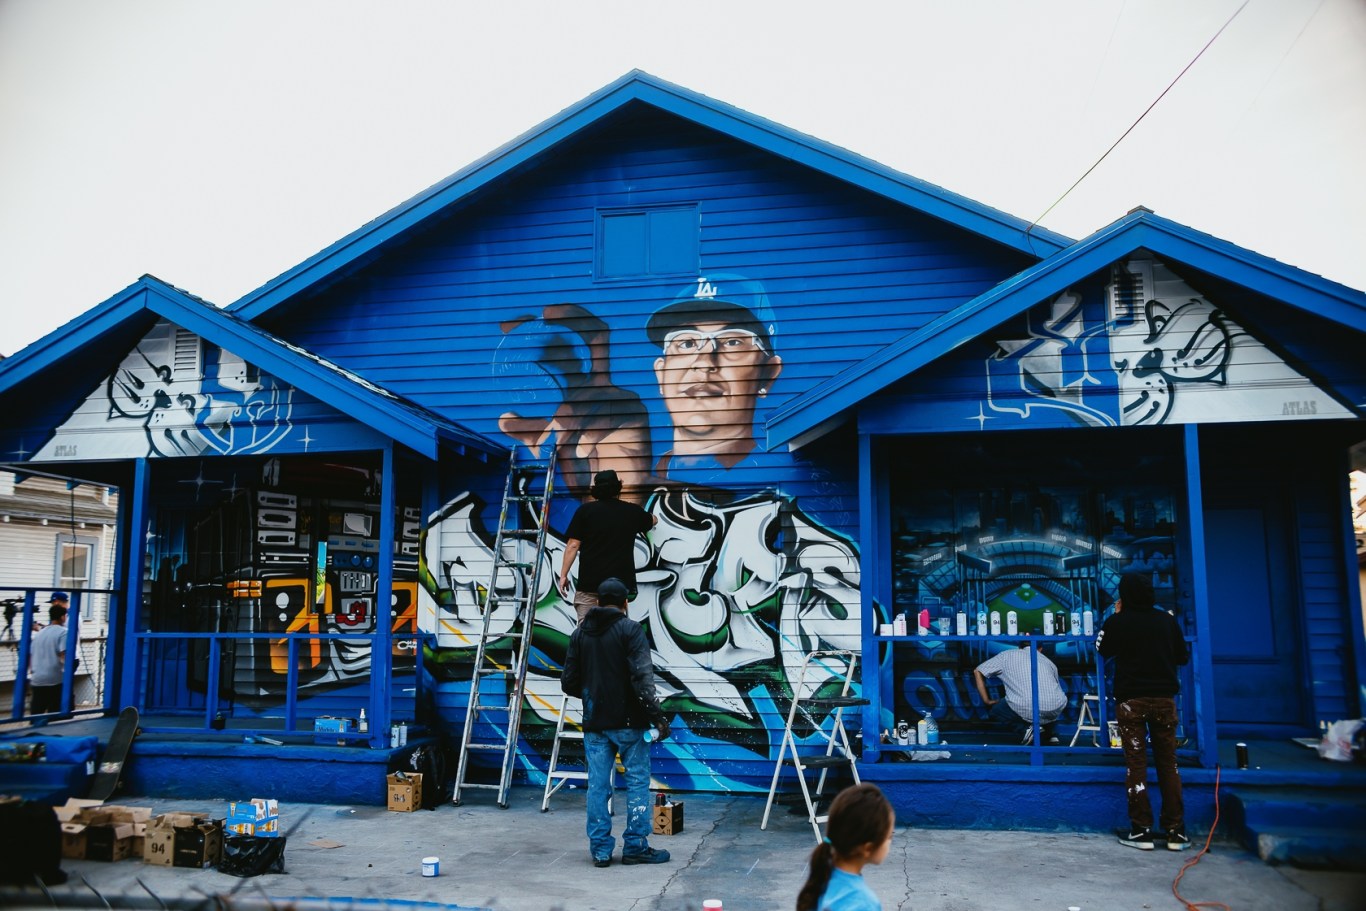 Not everyone is a fan of the East LA Dodger House